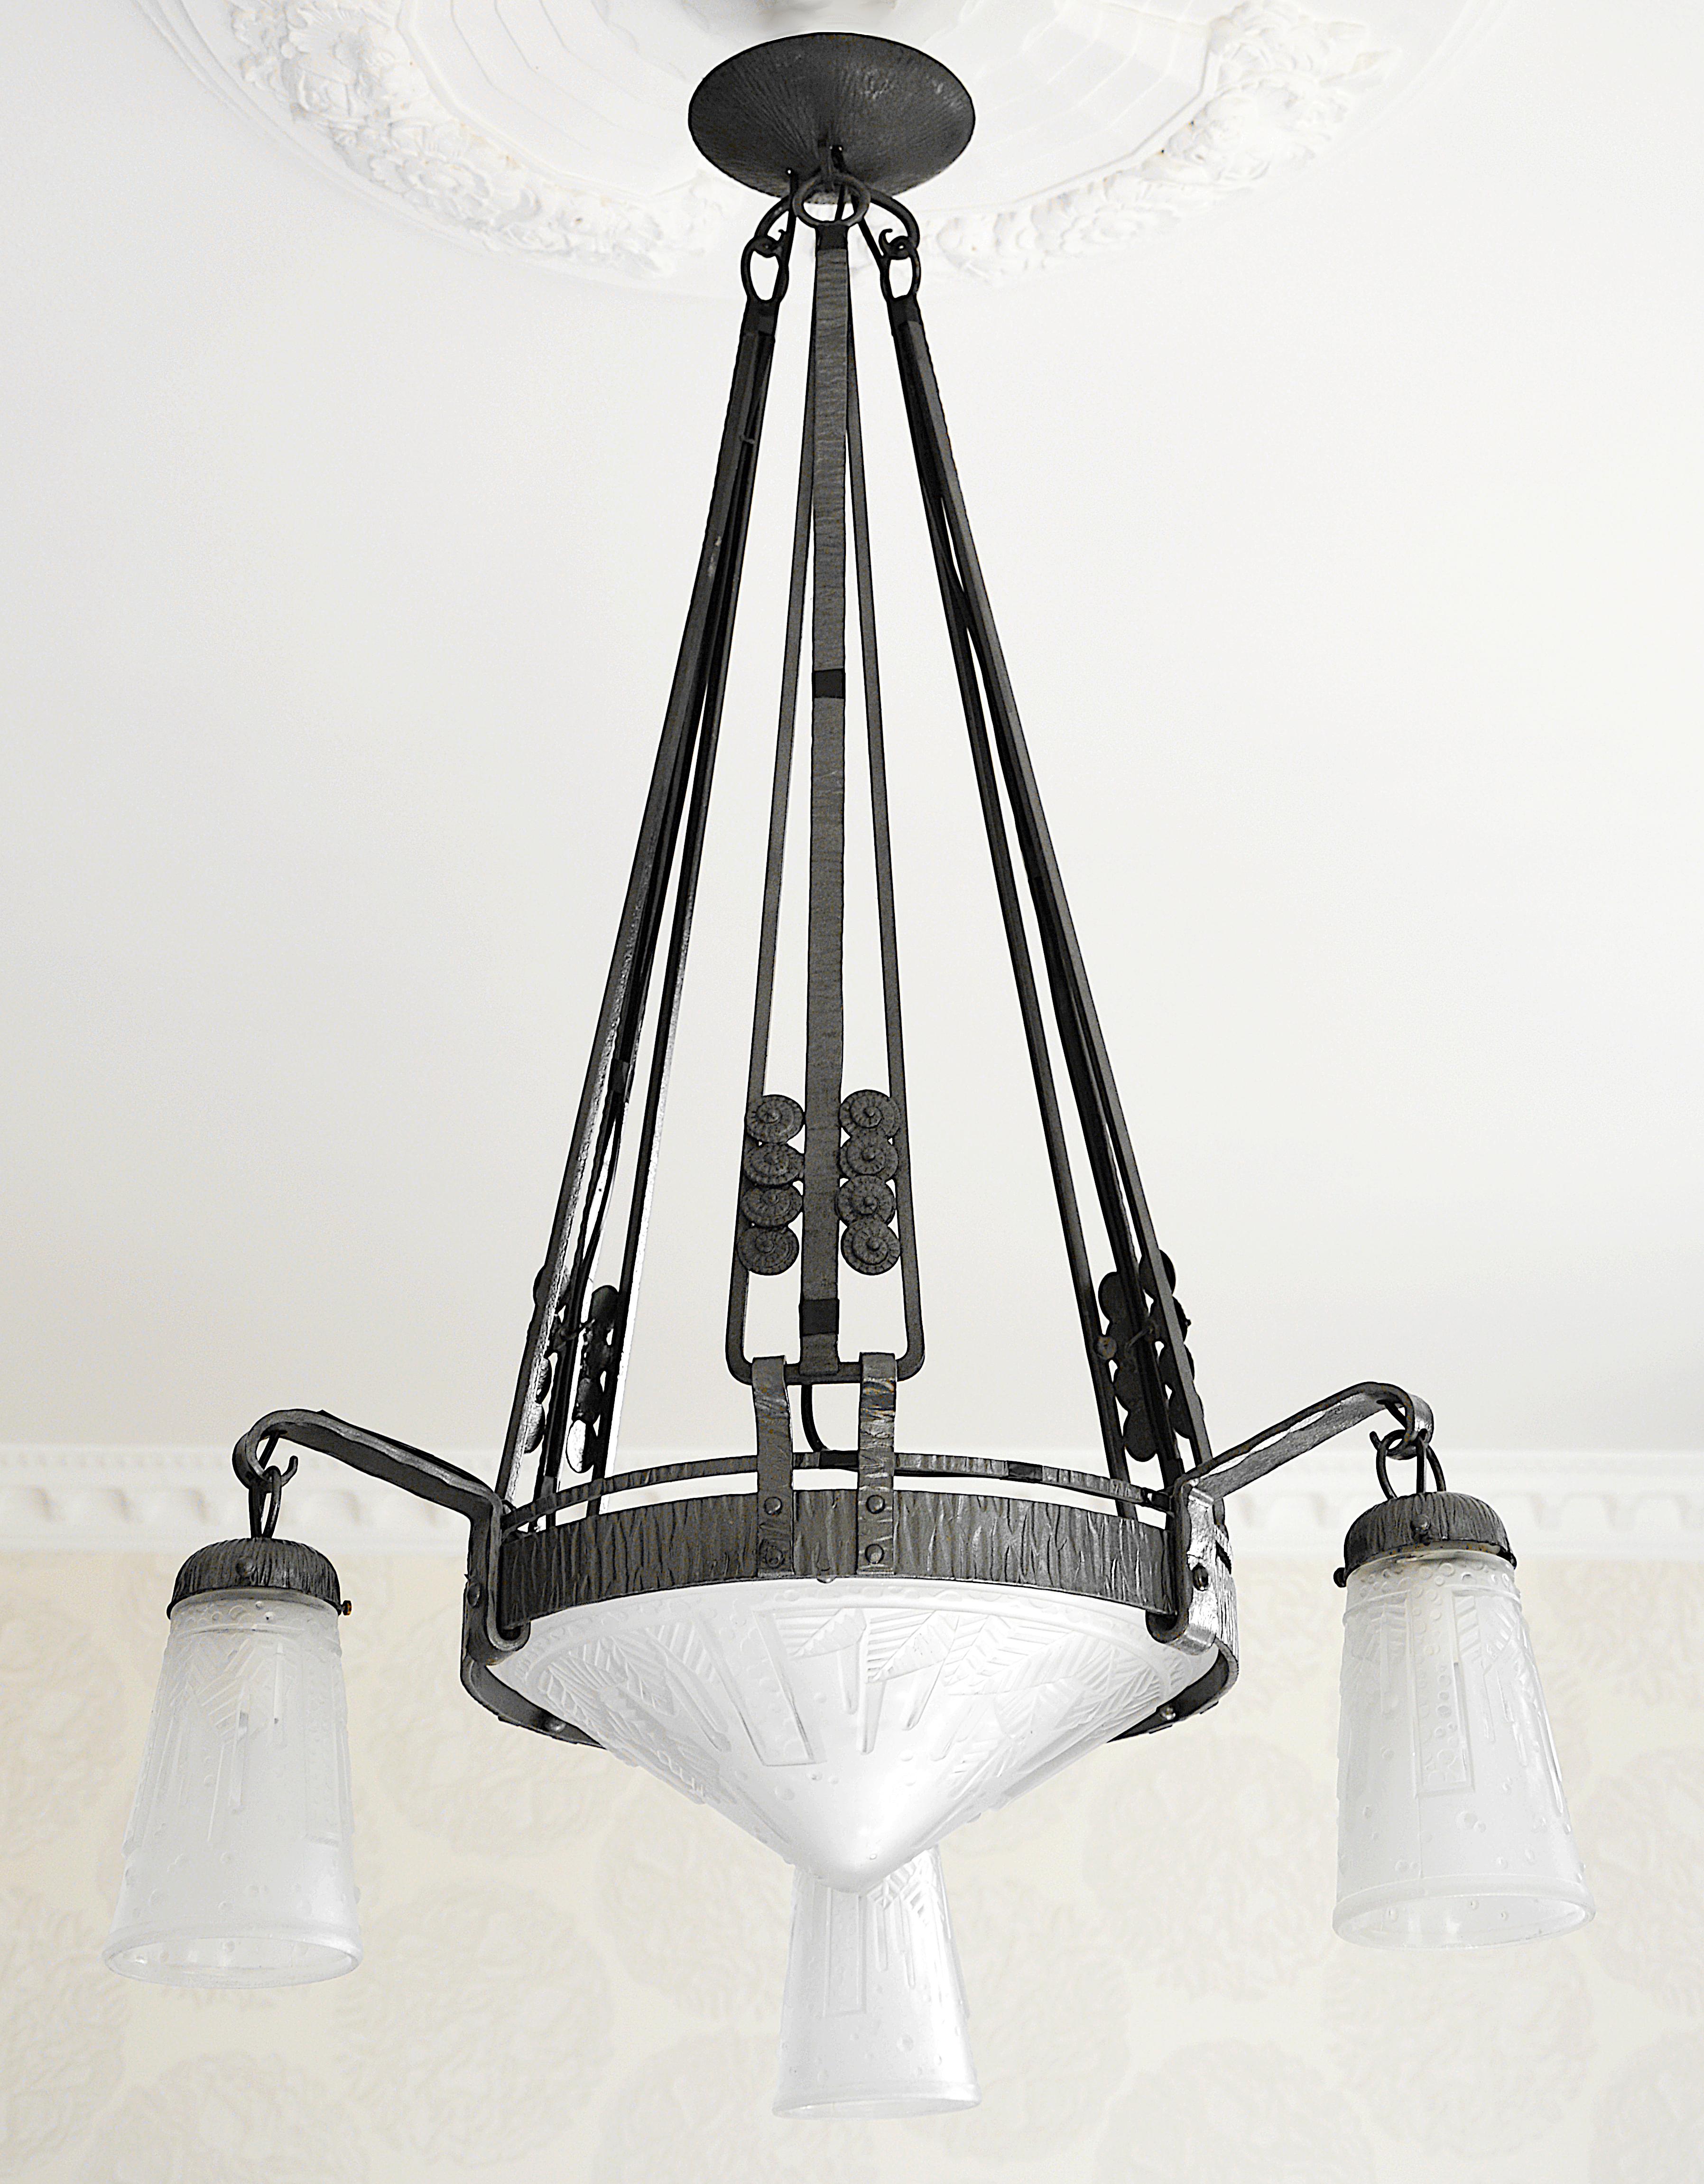 Large French Art Deco chandelier by Muller Freres (Luneville), France, circa 1925. Frosted molded glass shades with a stylized banana tree pattern. Superb wrought-iron fixture by Marcel VASSEUR (Paris). Measures: Height 36.6